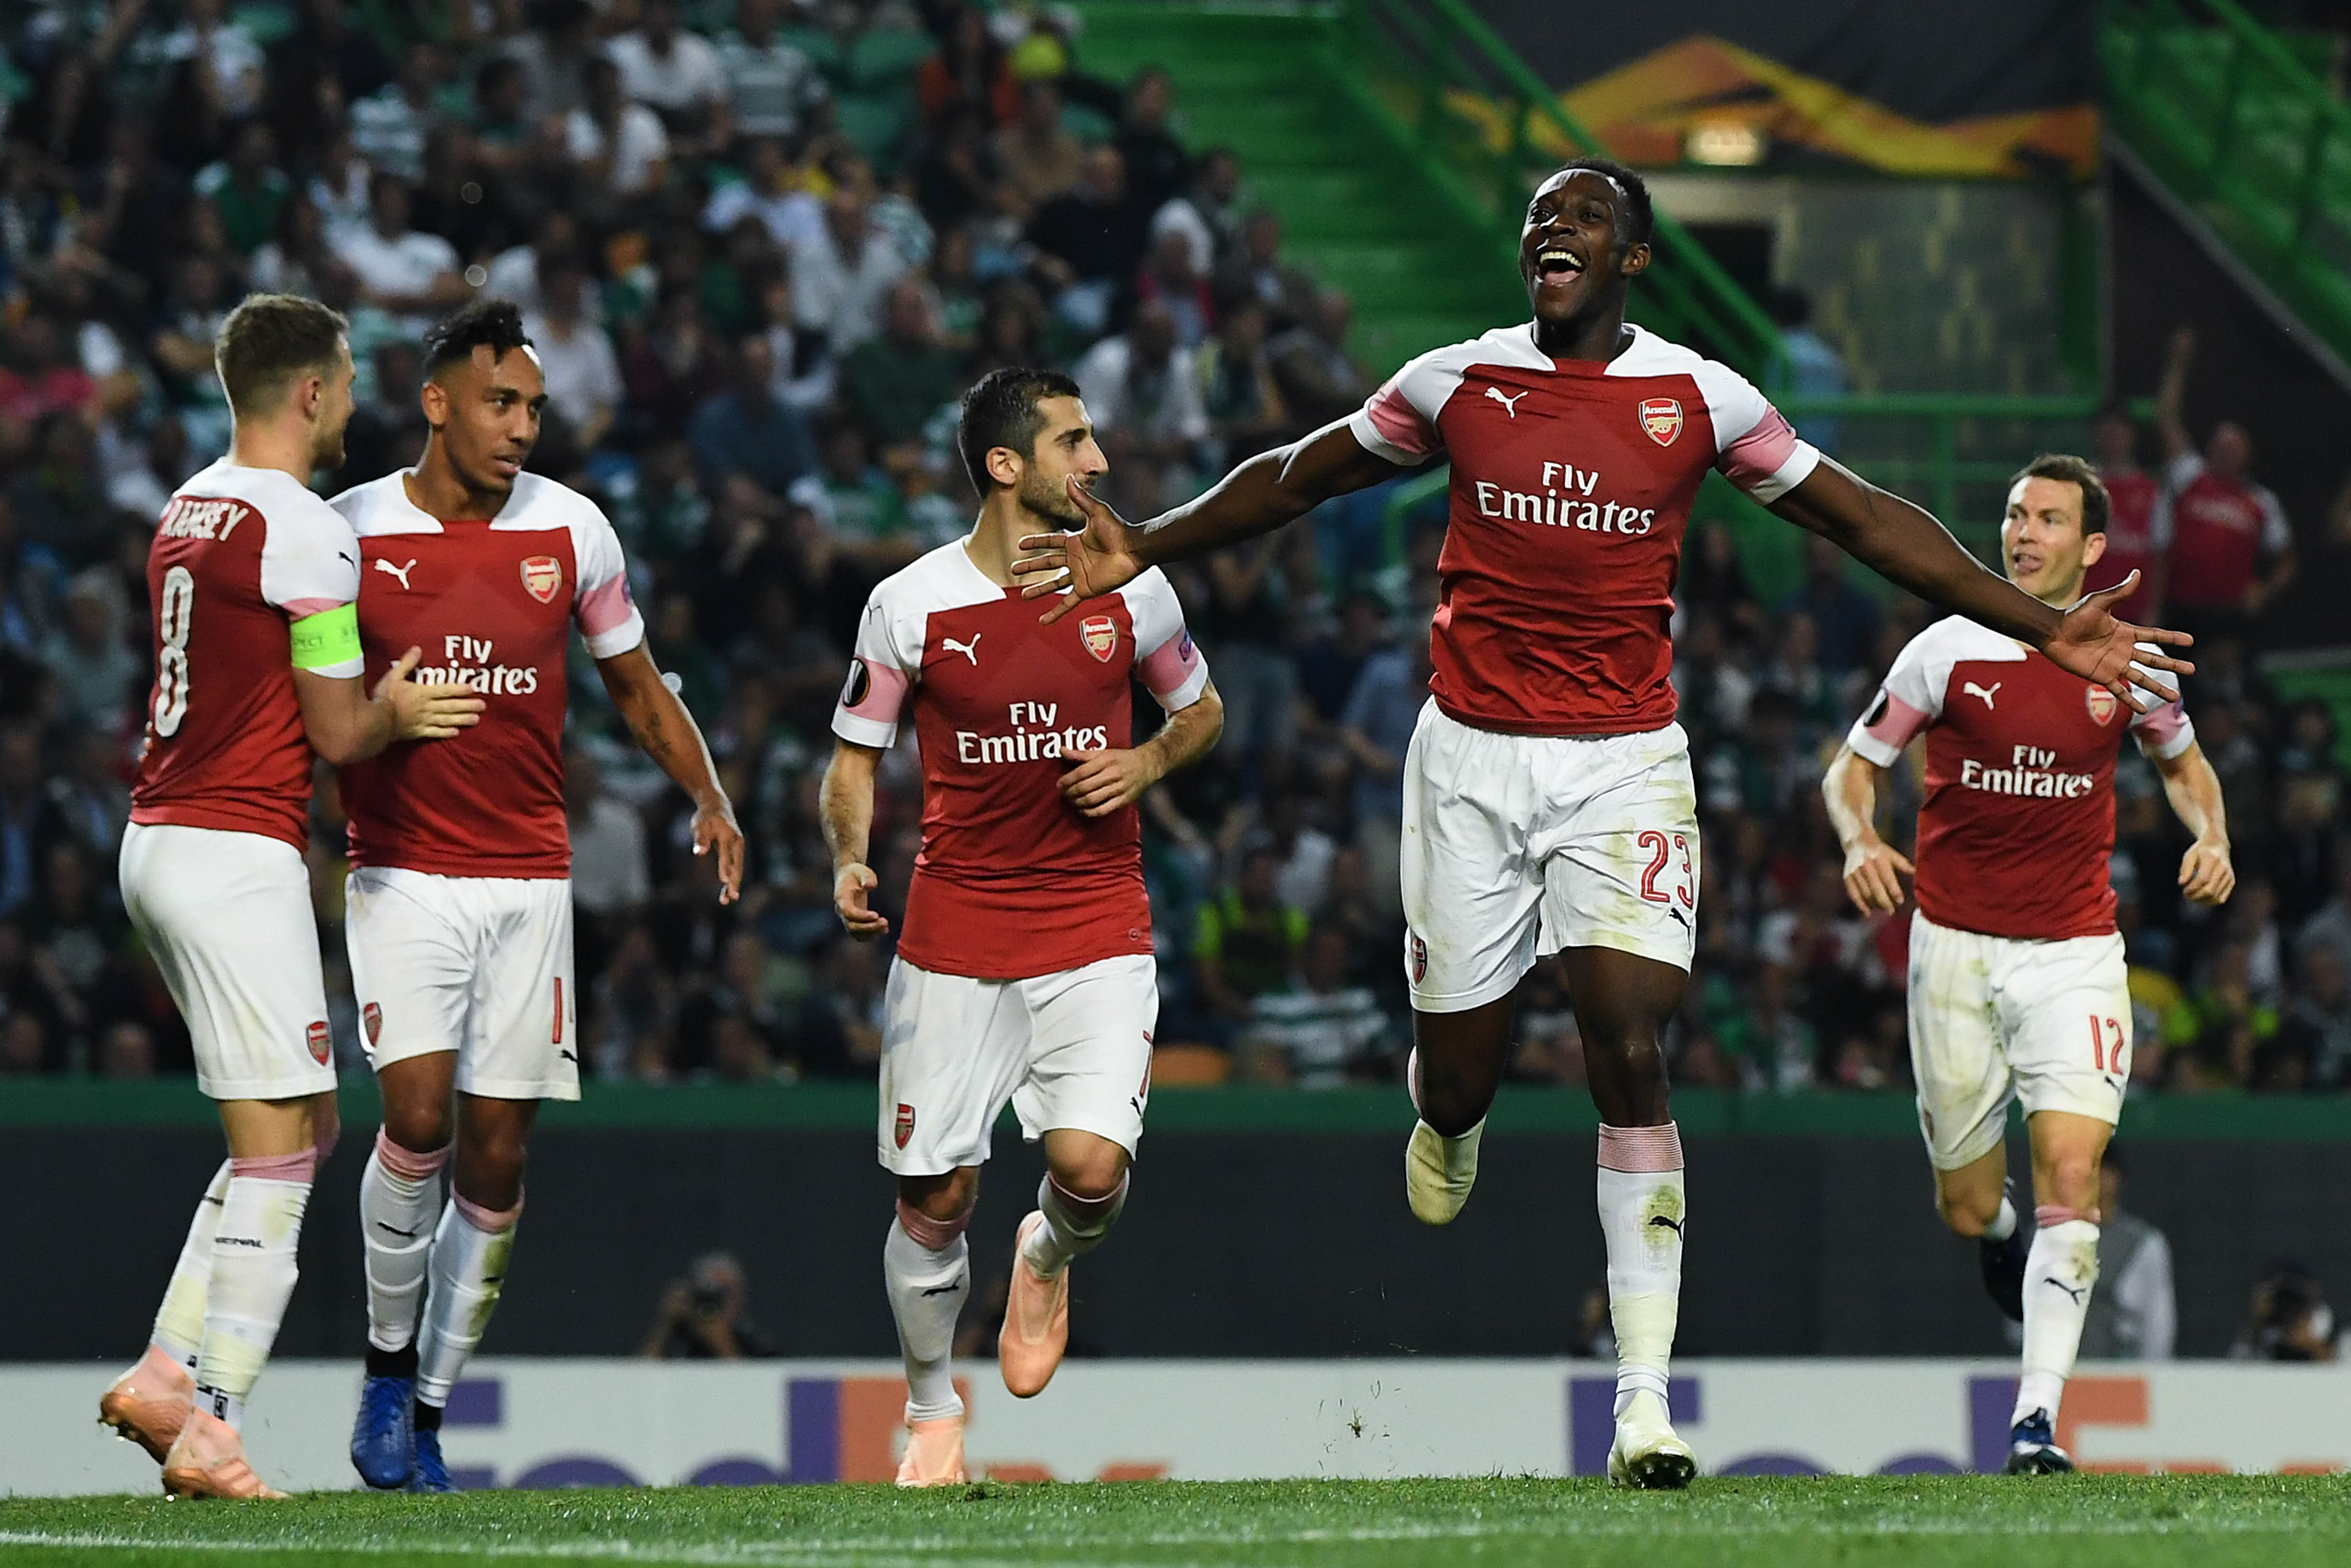 LISBON, PORTUGAL - OCTOBER 25:  Danny Welbeck of Arsenal FC celebrates  after scoring his team's first goalduring the UEFA Europa League Group E match between Sporting CP and Arsenal at Estadio Jose Alvalade on October 25, 2018 in Lisbon, Portugal.  (Photo by David Ramos/Getty Images)